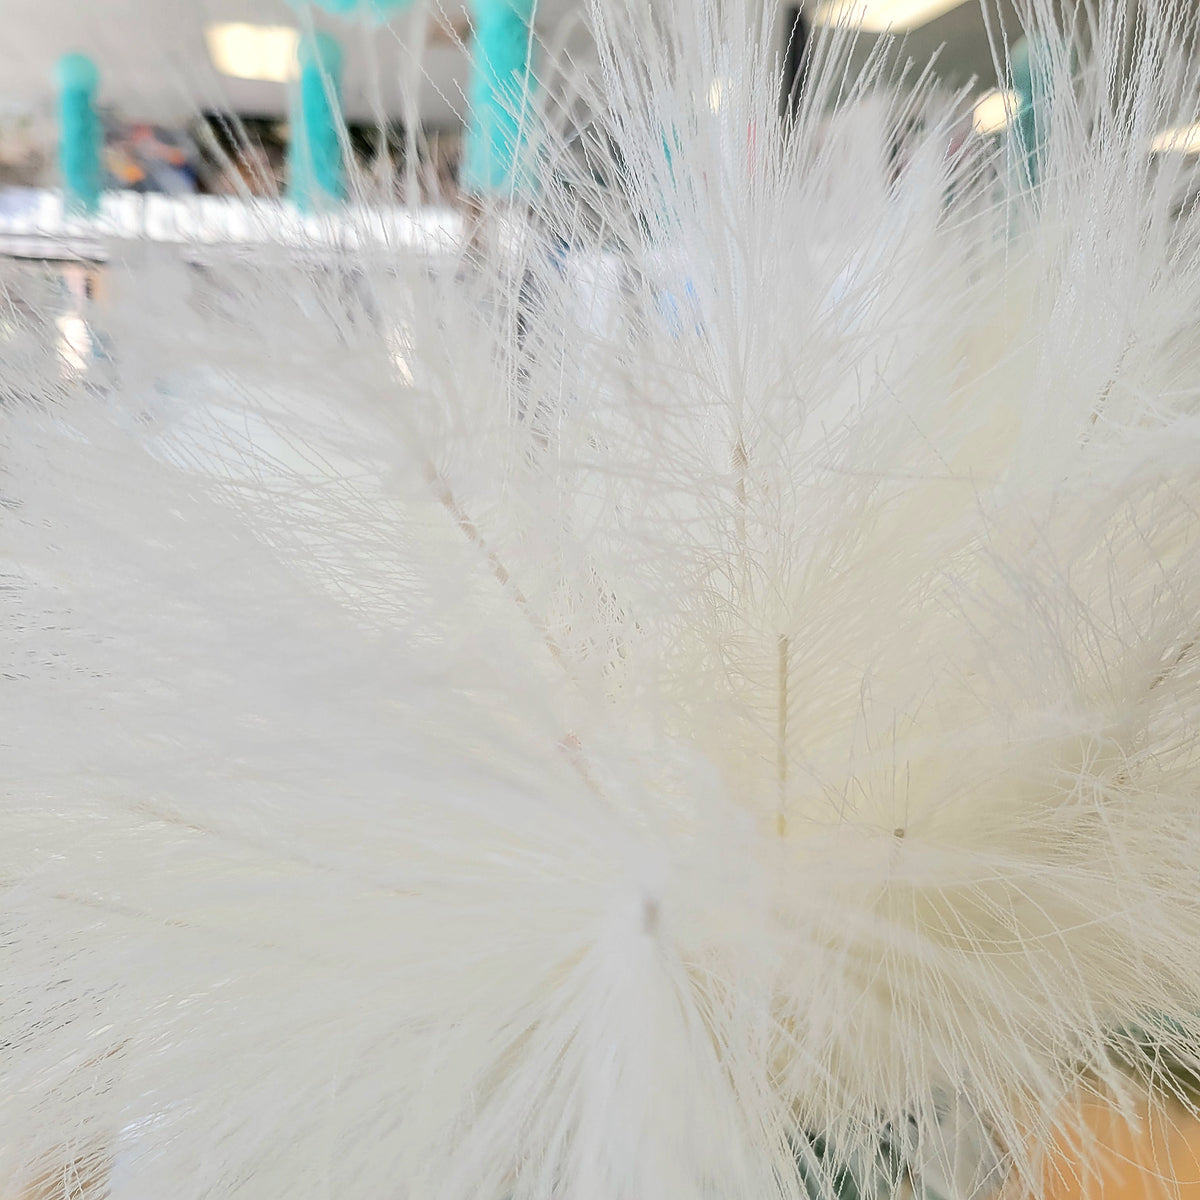 White Feather Pampas Grass